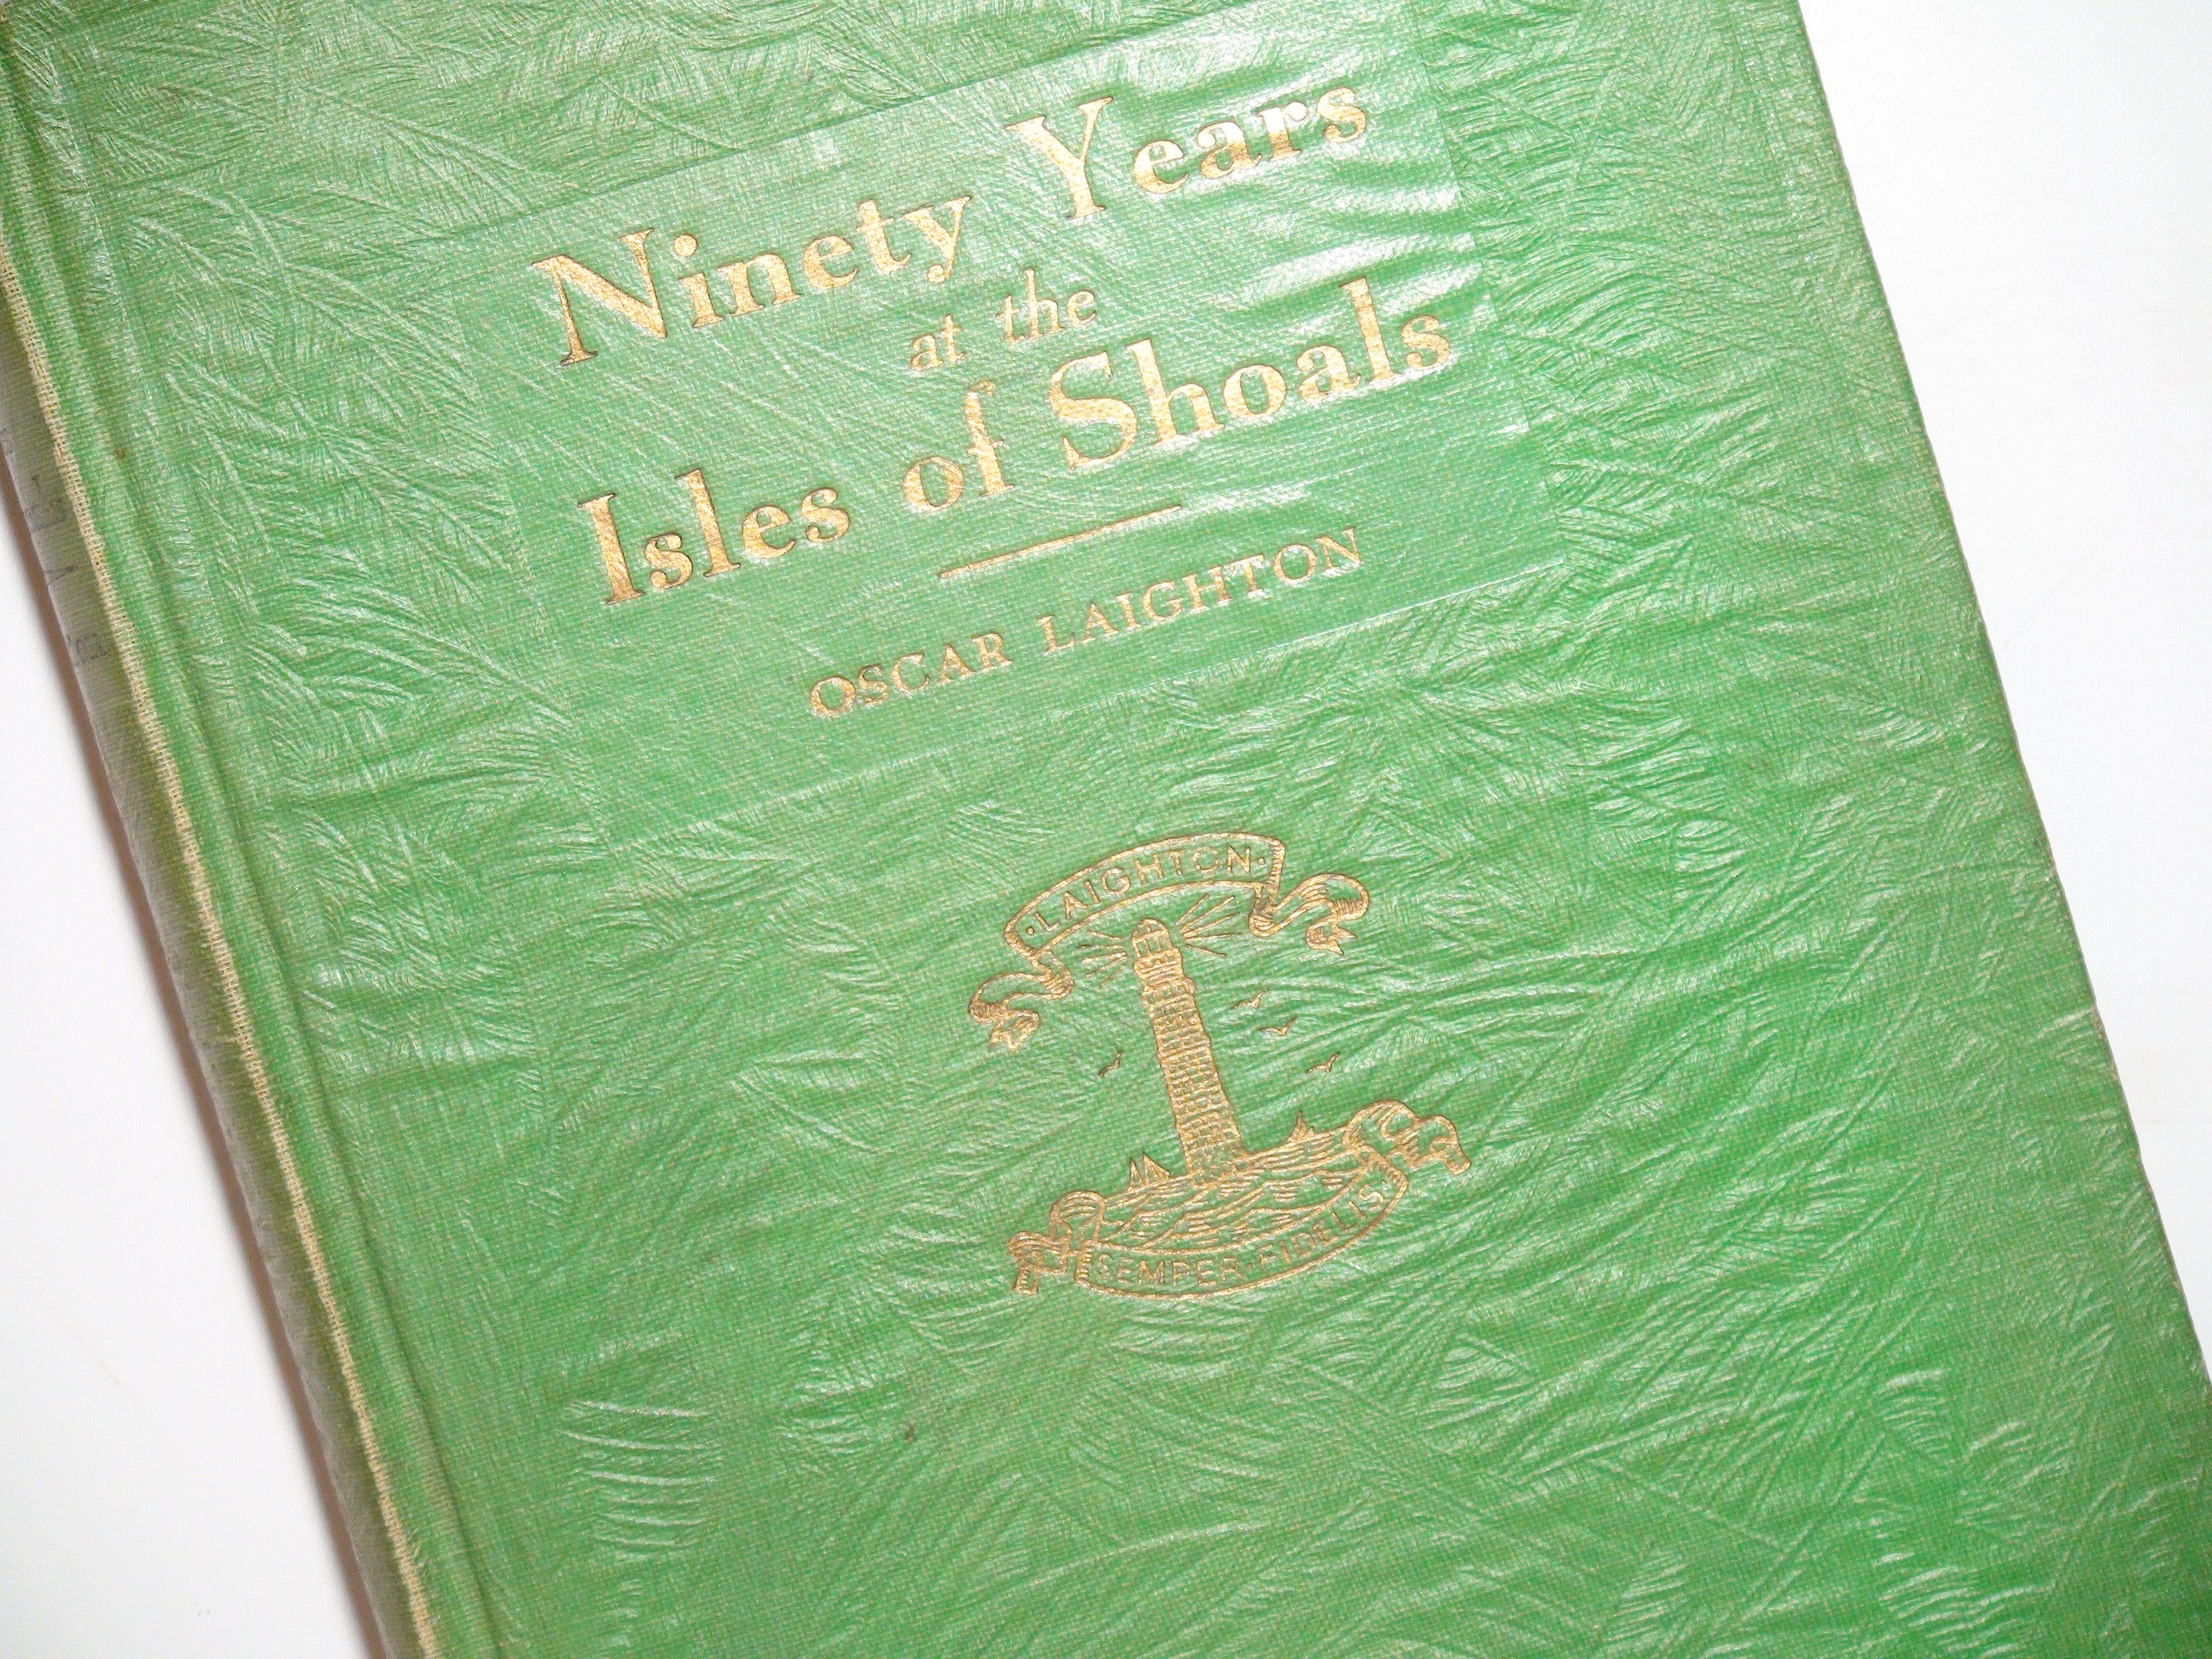 Ninety Years at the Isles of Shoals by Oscar Laighton, Illustrated, 1st Ed, 1930